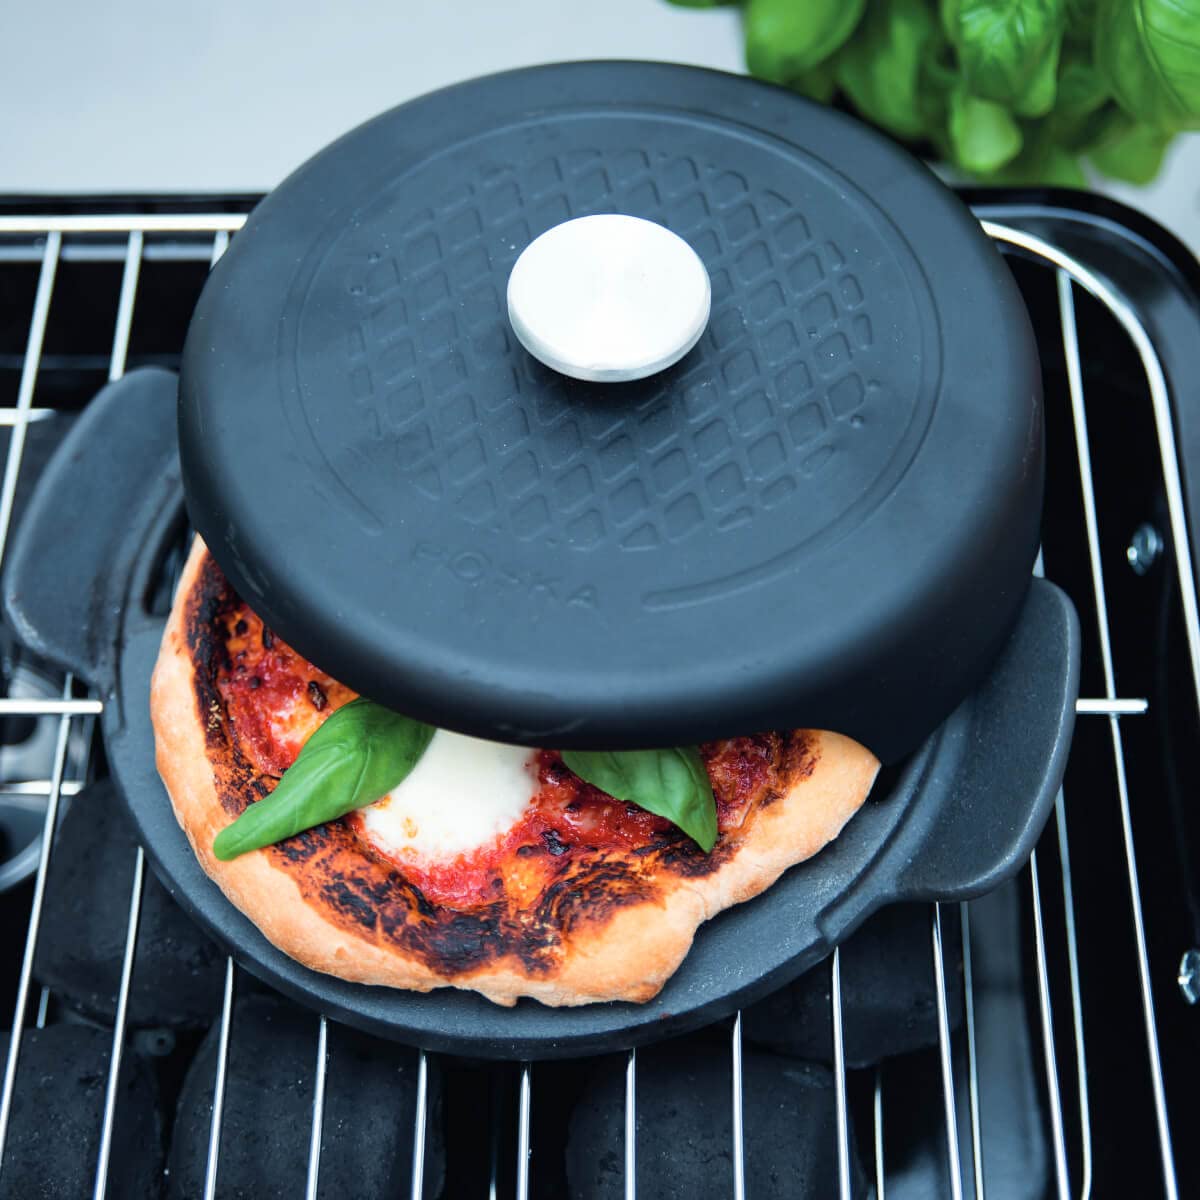 Boska Stainless Steel Pizza Baker - Cast Iron Pizza Pan - For Cooking, Baking, Grilling - Durable, Even-Heating, and Versatile Kitchen Cookware - Dual Handle Pan